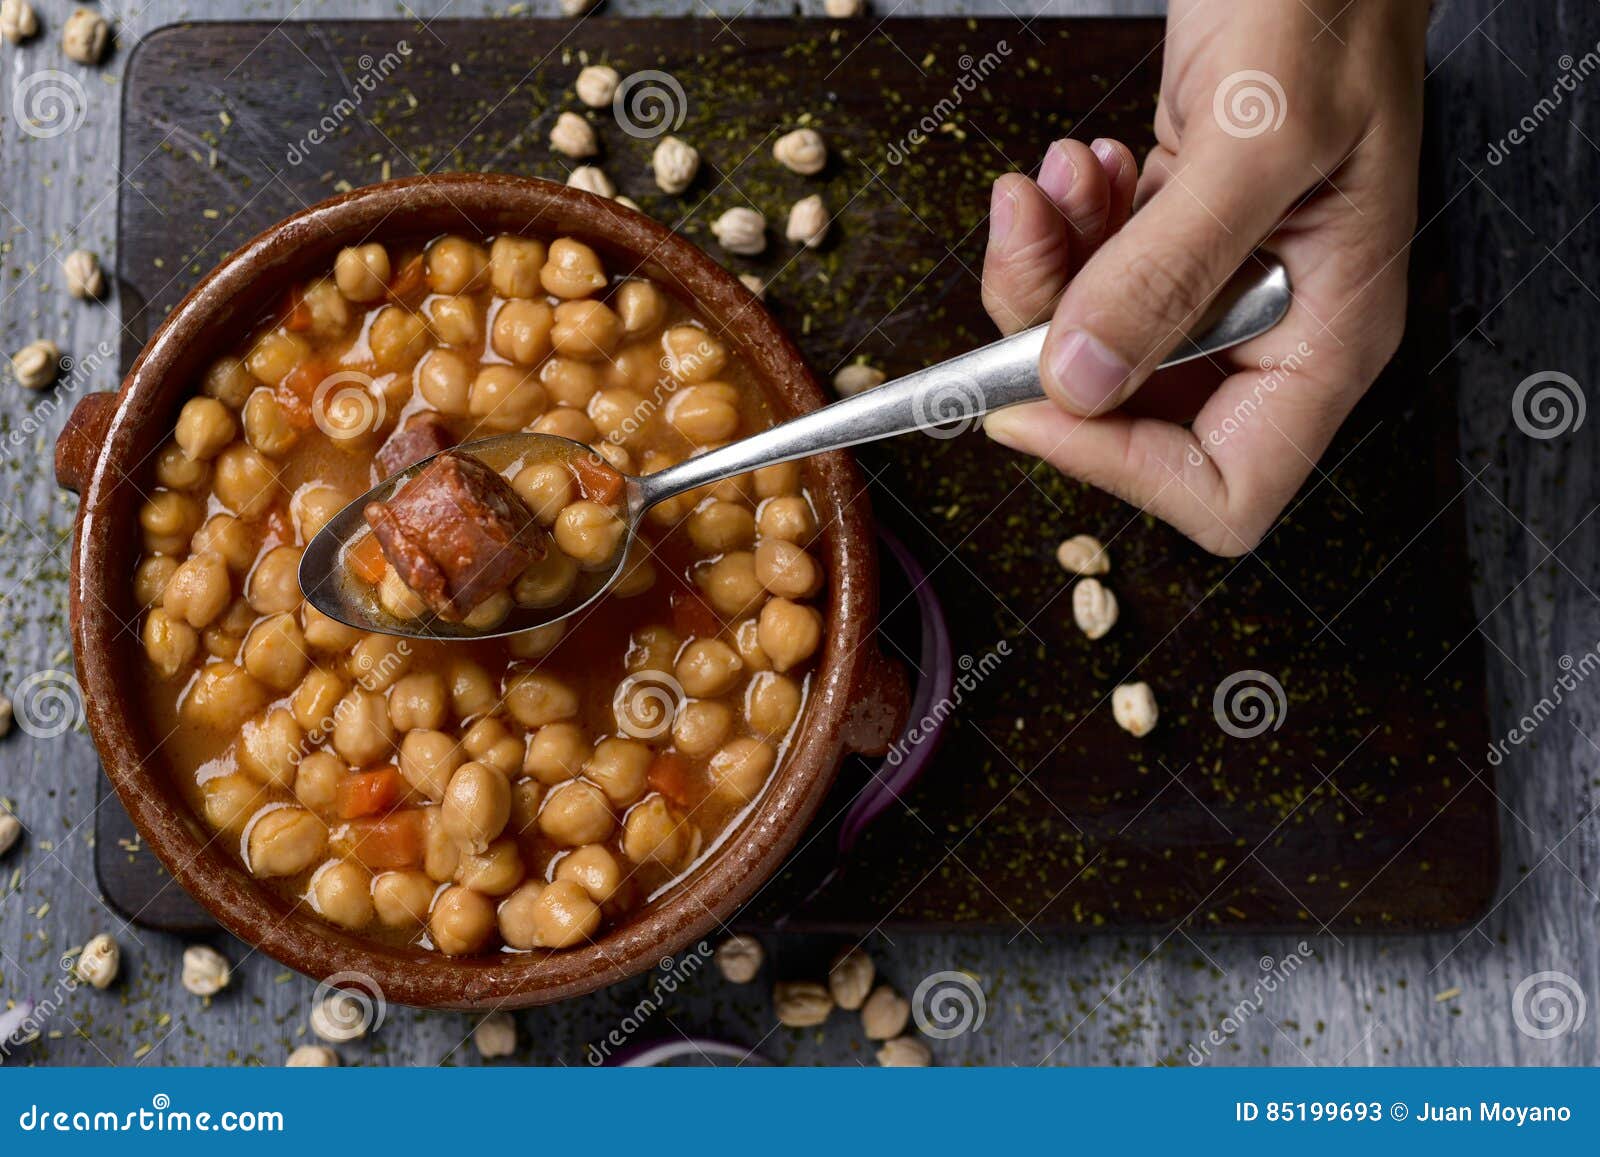 spanish cocido madrileno, stew typical of madrid